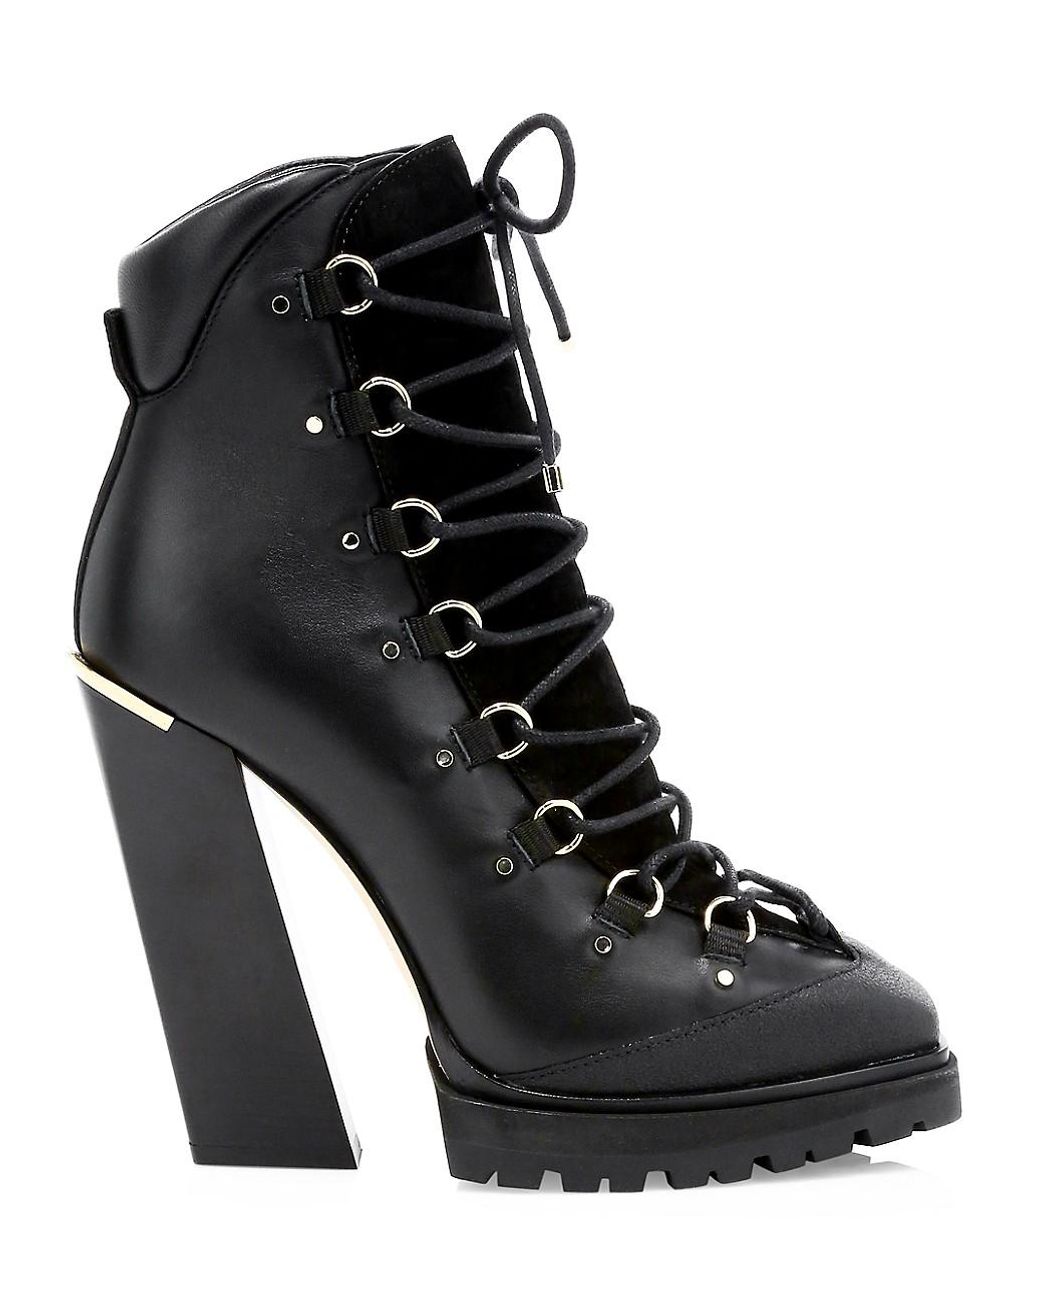 Jimmy Choo Rubber Madyn 130mm Lace-up Boots in Black - Save 54% - Lyst